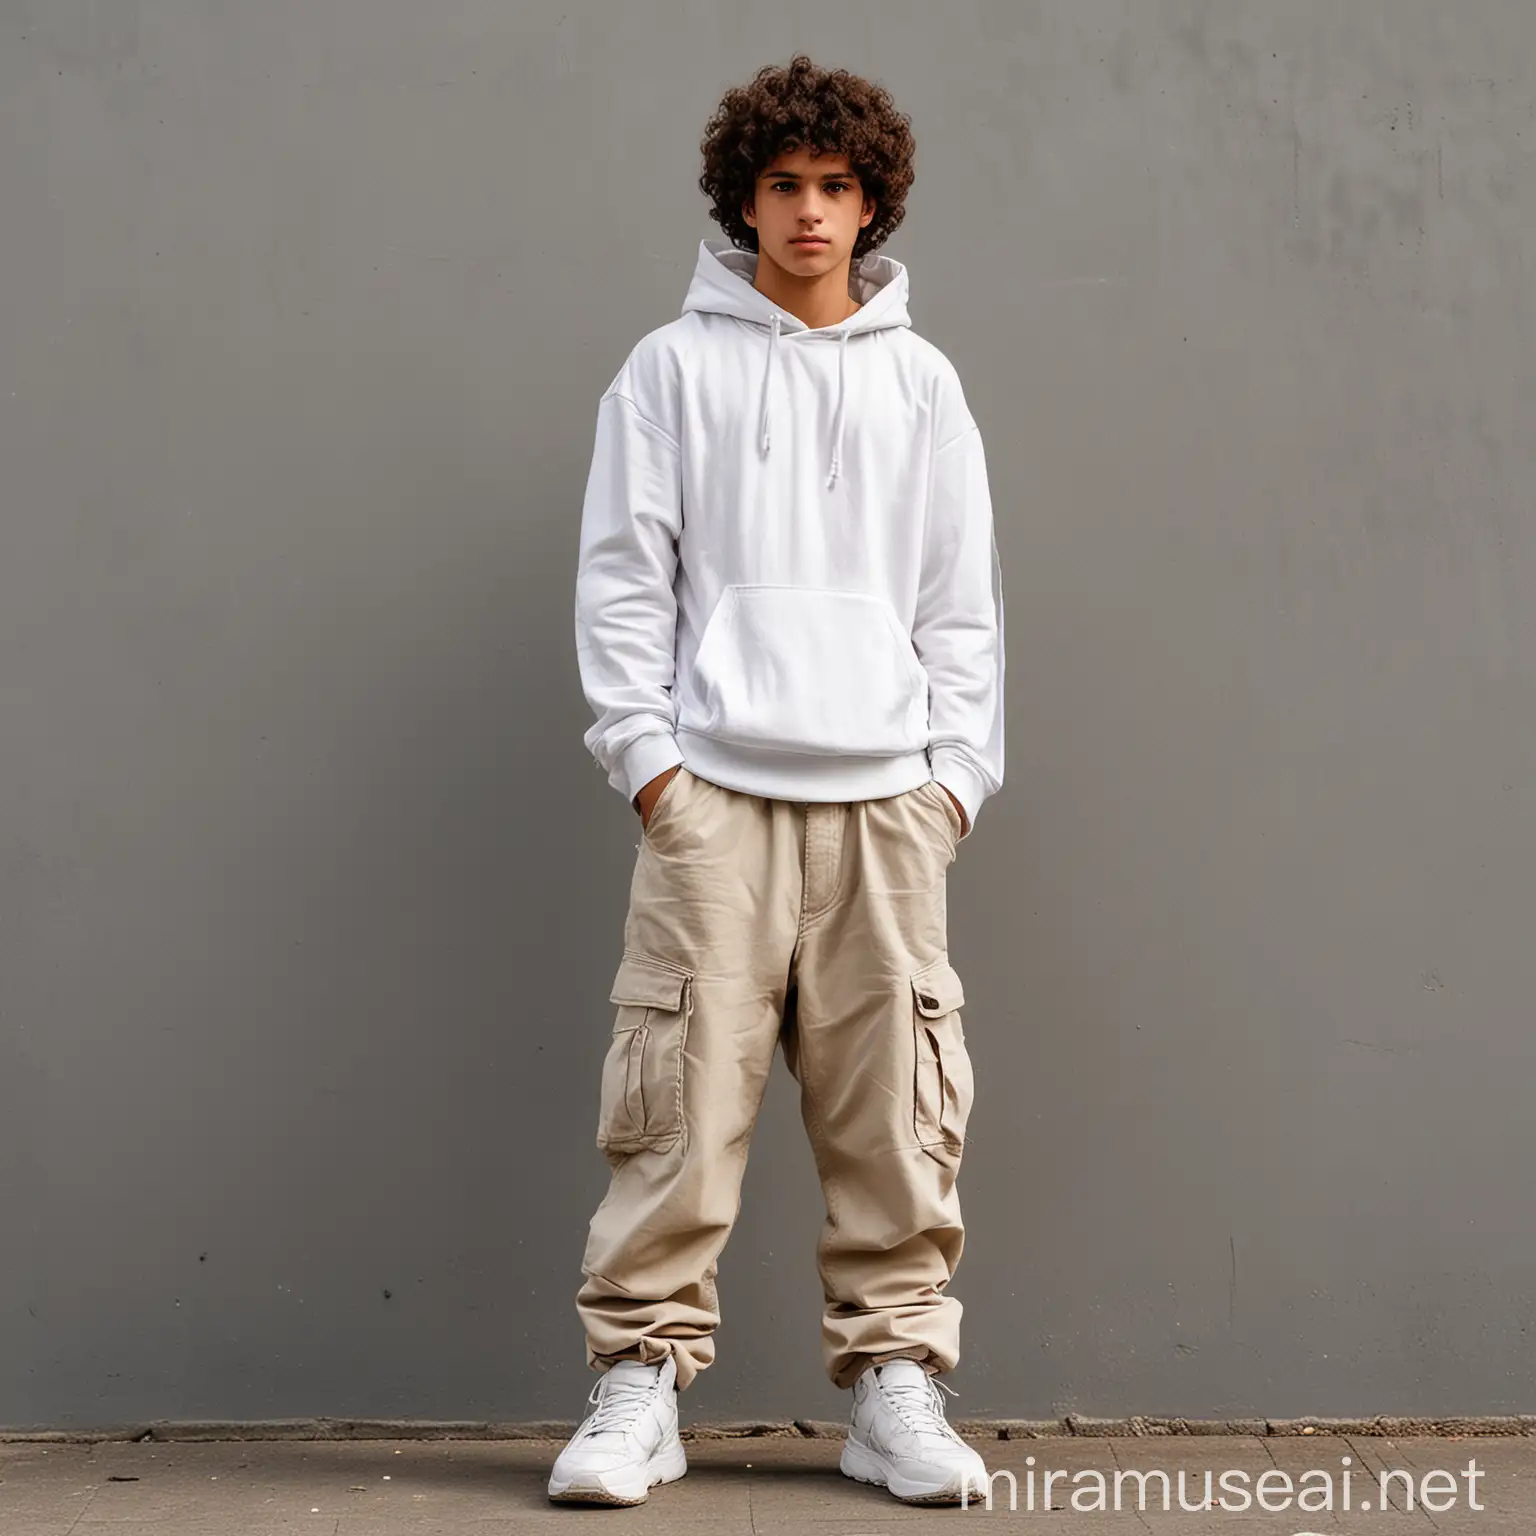 Teenager in Wide Cargo Pants Carrying White Hoodie